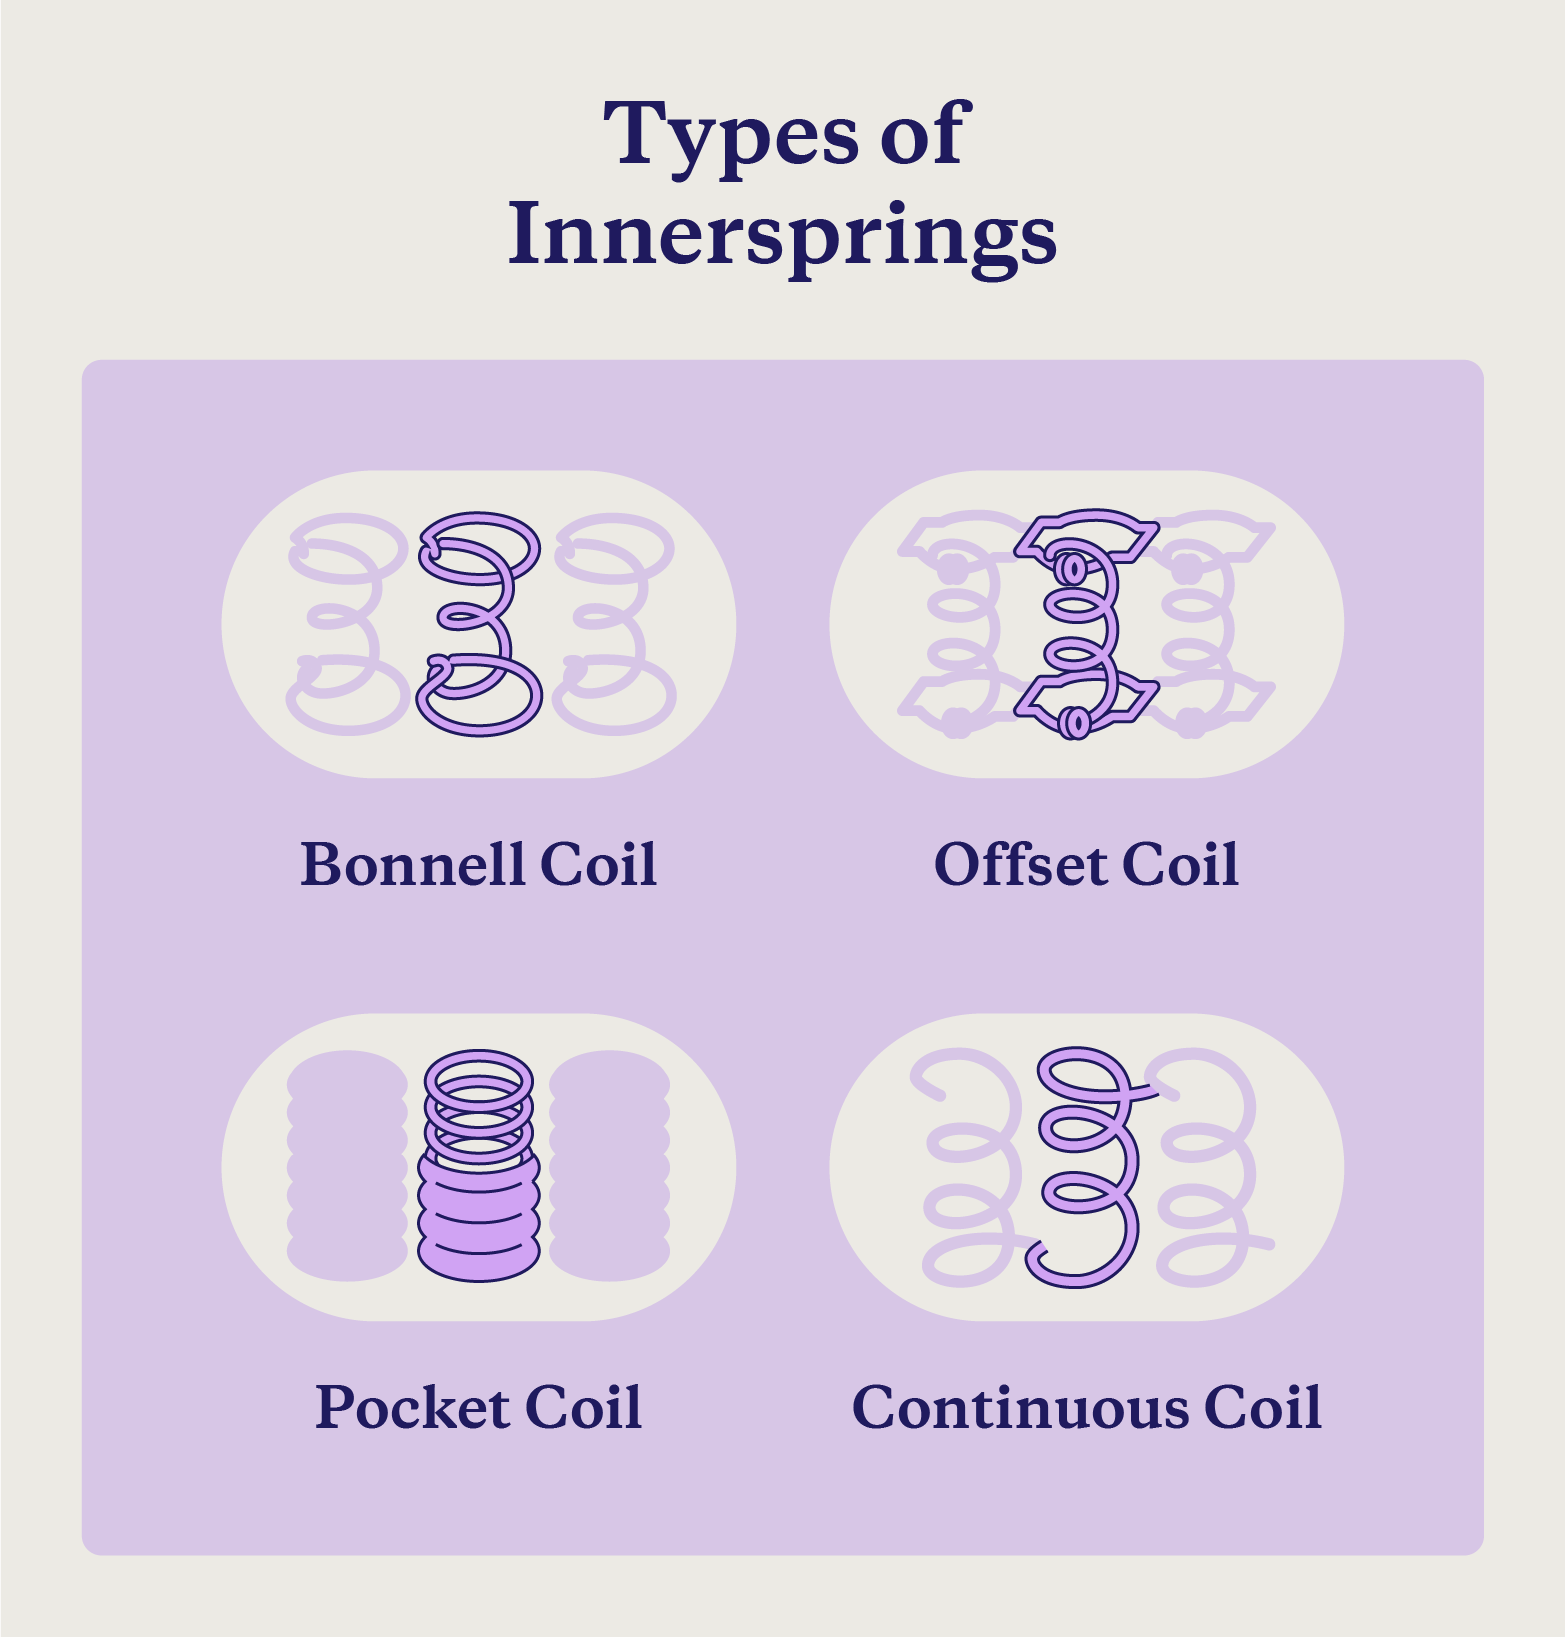 Illustration of the four types of innersprings, which are Bonnell coils, continuous coils, offset coils, and pocket coils.